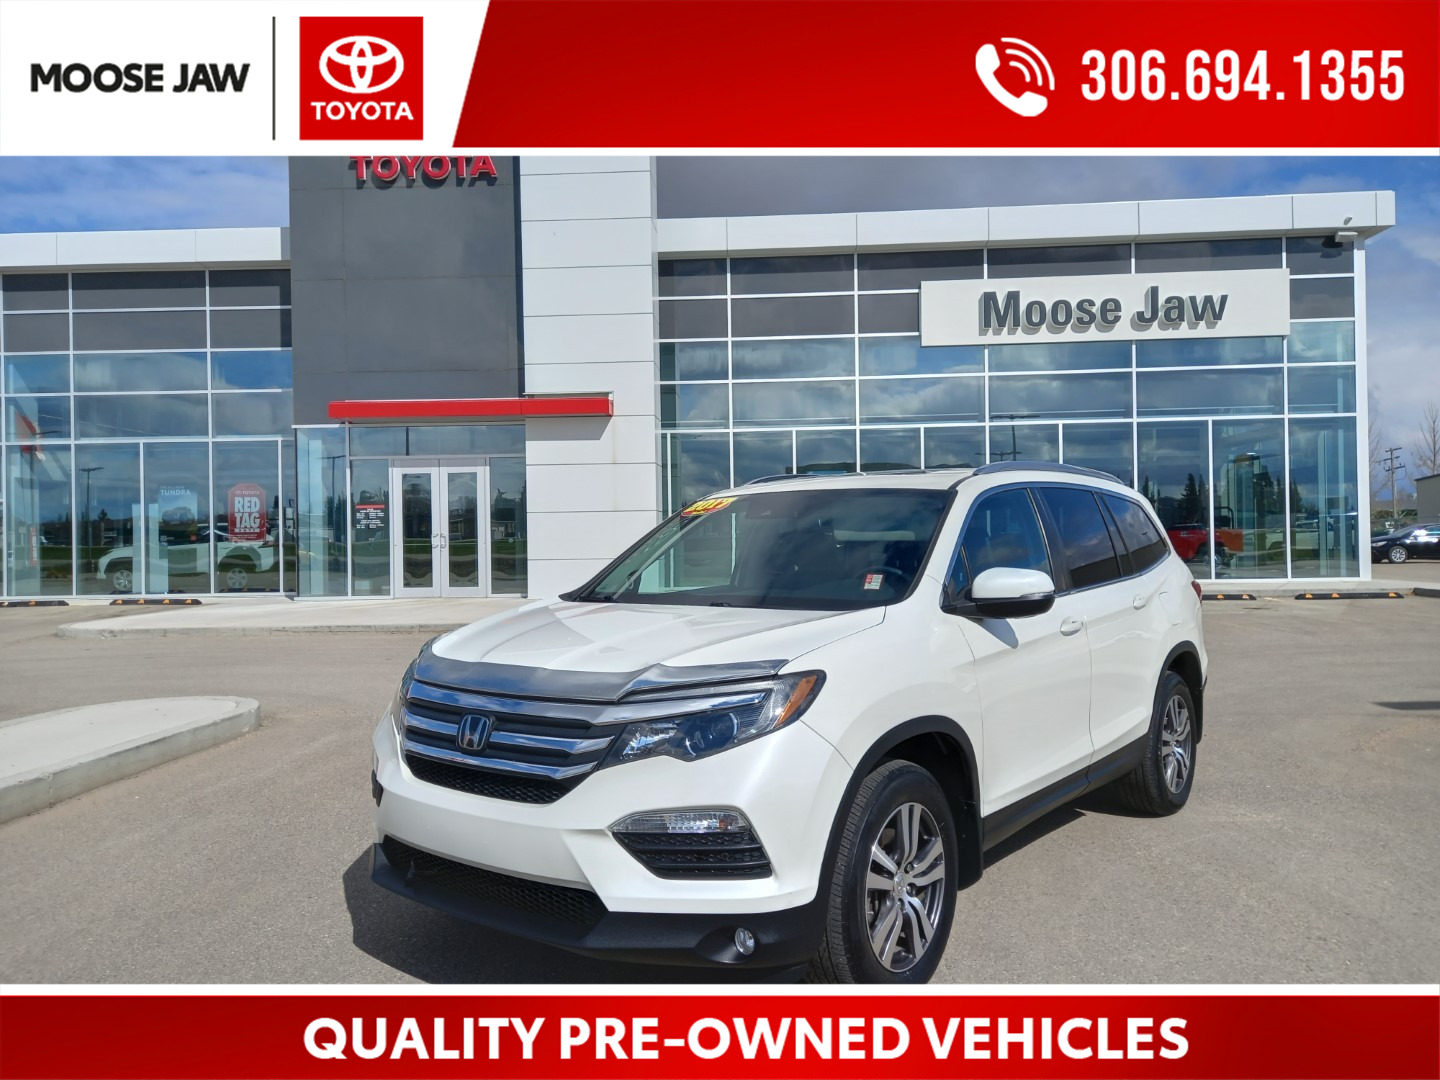 2017 Honda Pilot EX-L Navi LOCAL TRADE WITH ONLY 86,211 KMS, 8 PASS